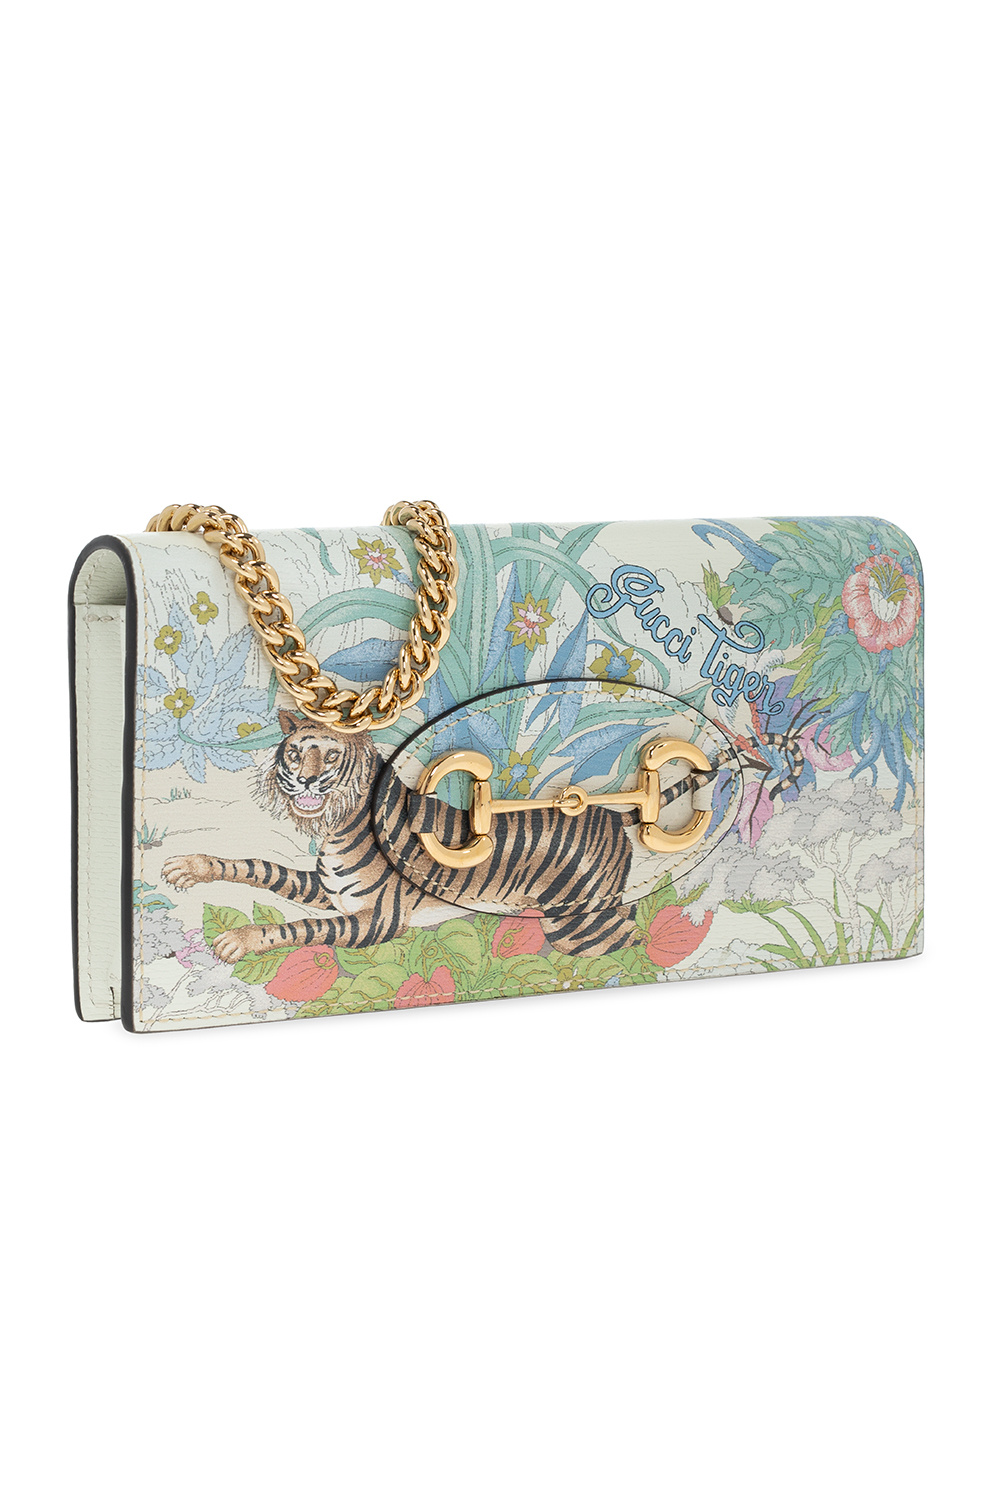 Gucci Patterned dionysus from the ‘Gucci Tiger’ collection